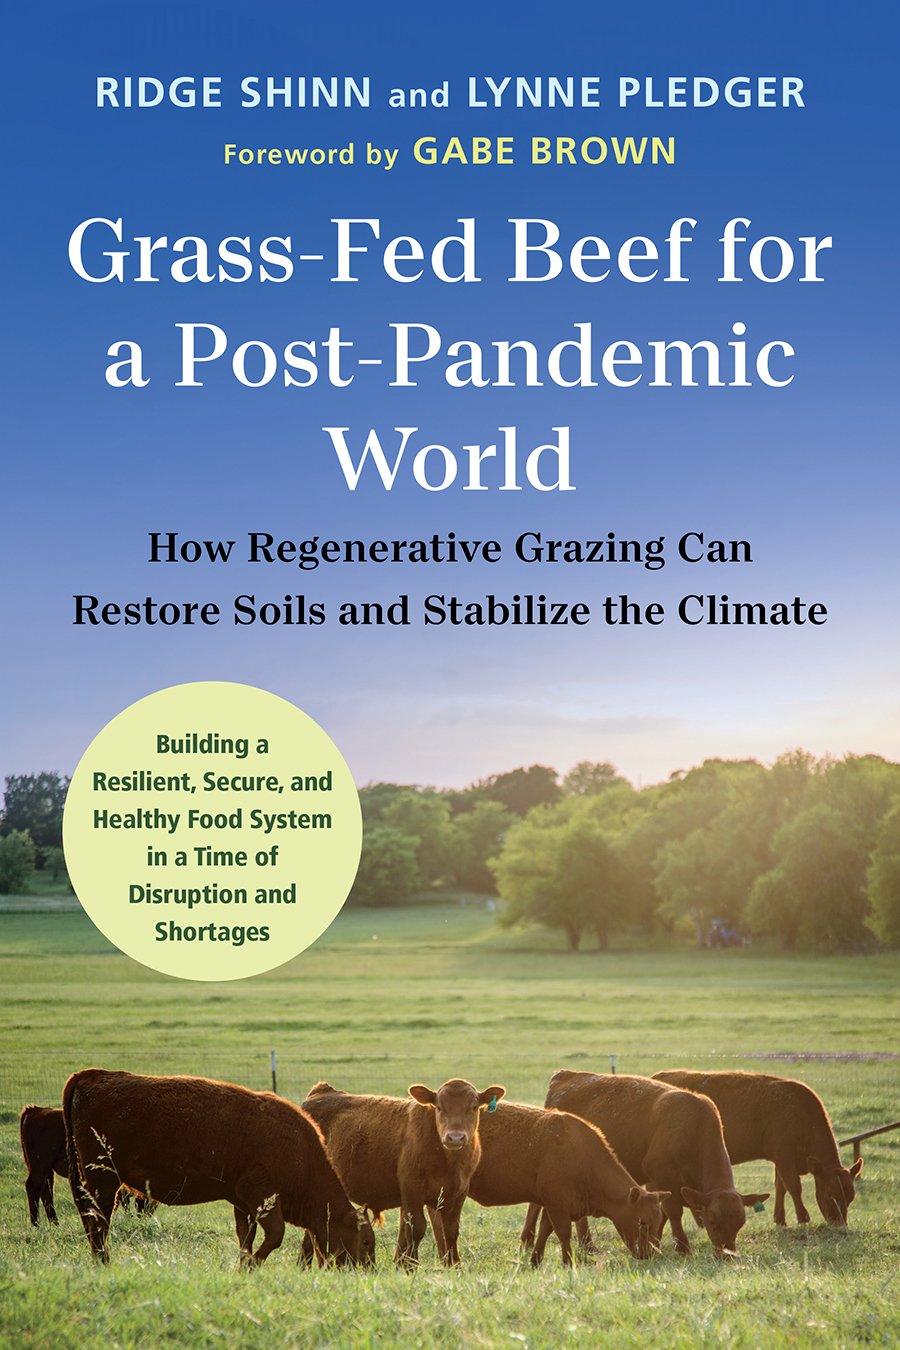 Grass-Fed Beef for a Post-Pandemic World - Chelsea Green